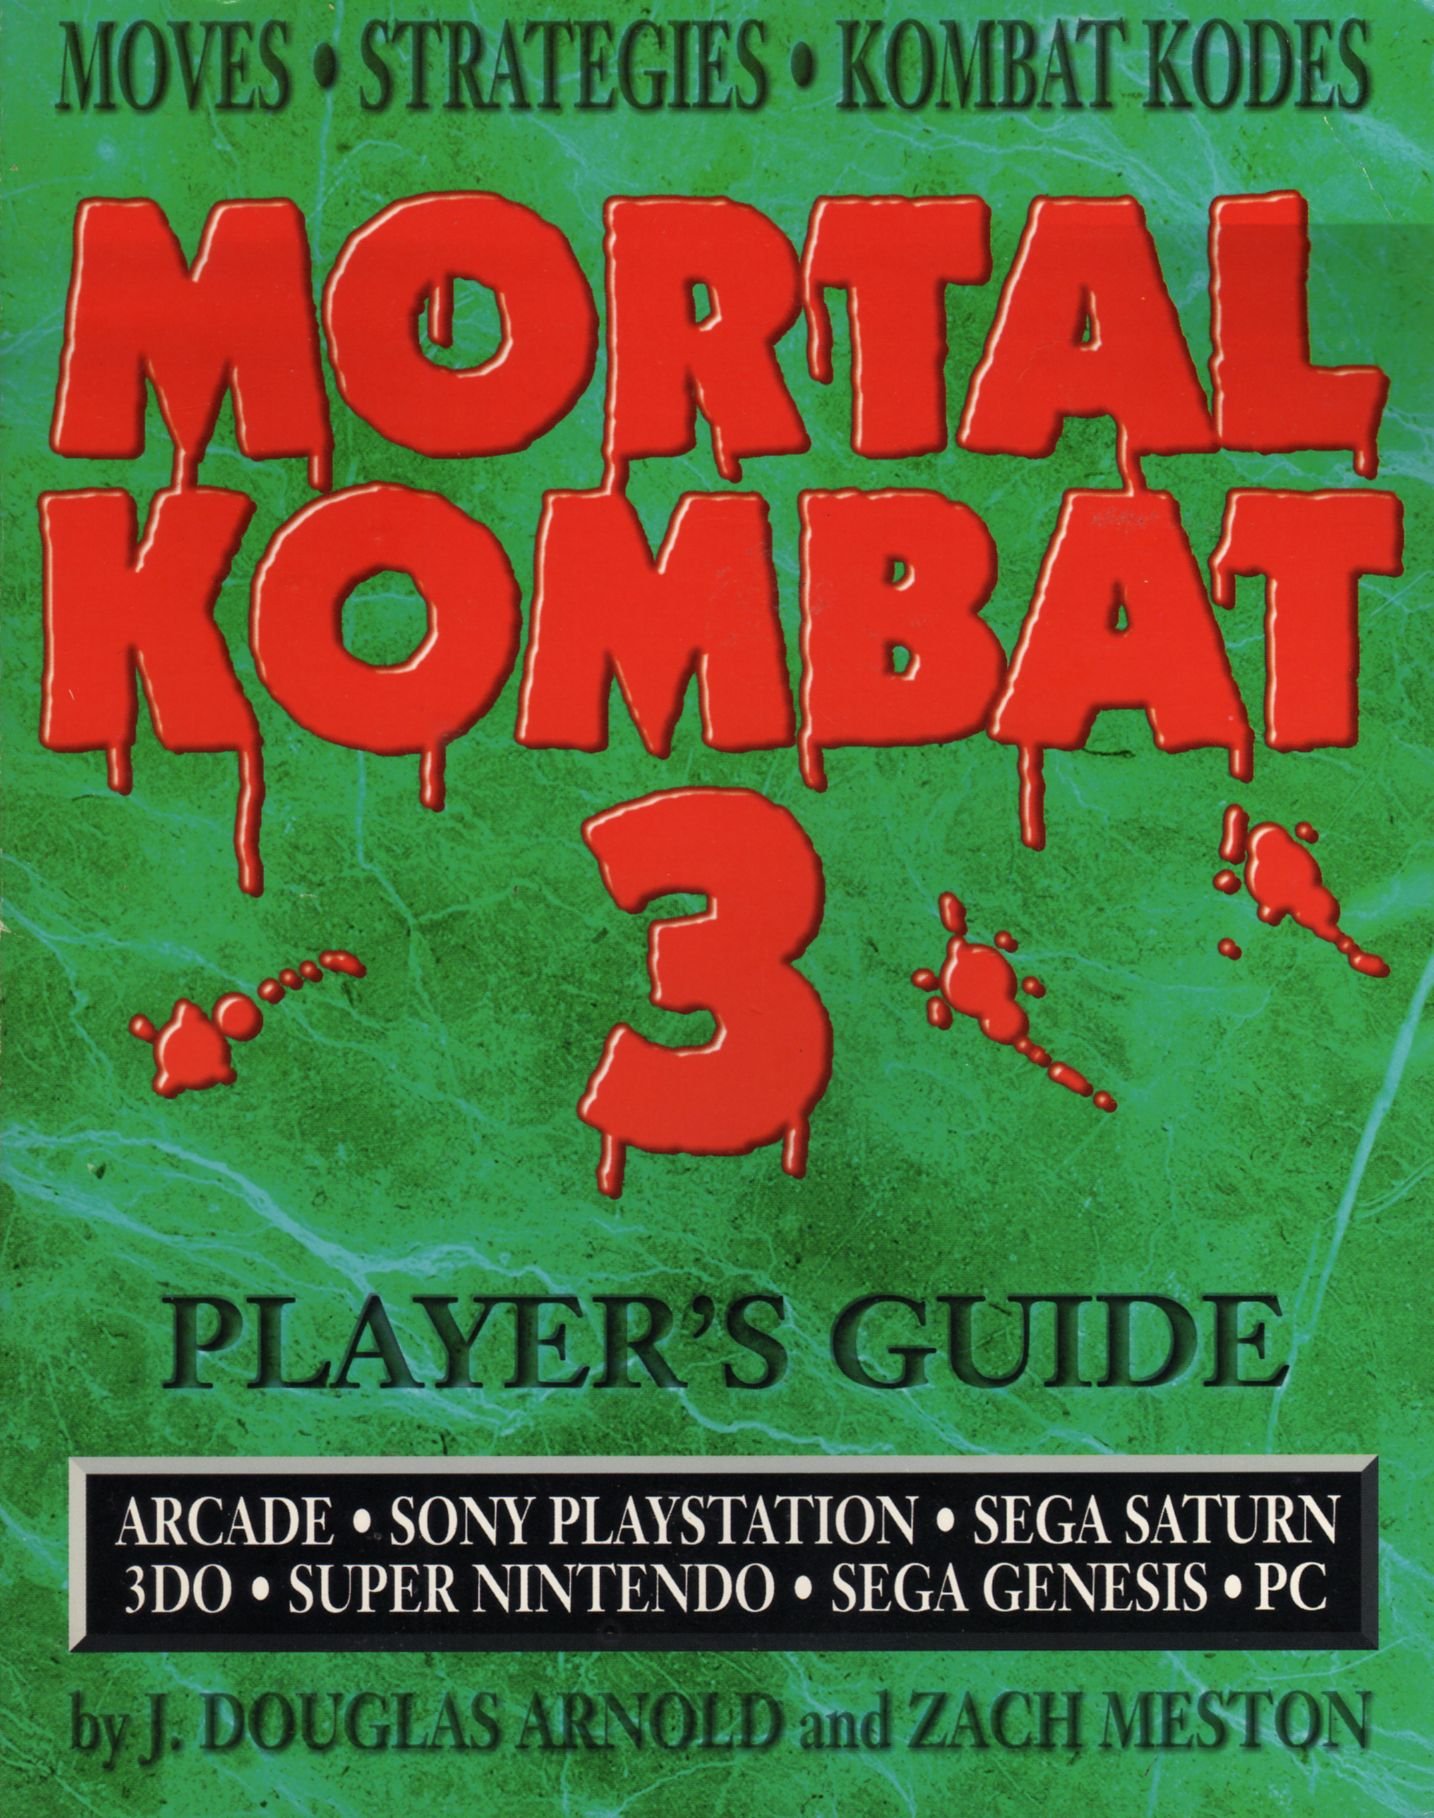 More information about "Mortal Kombat 3 Player's Guide"